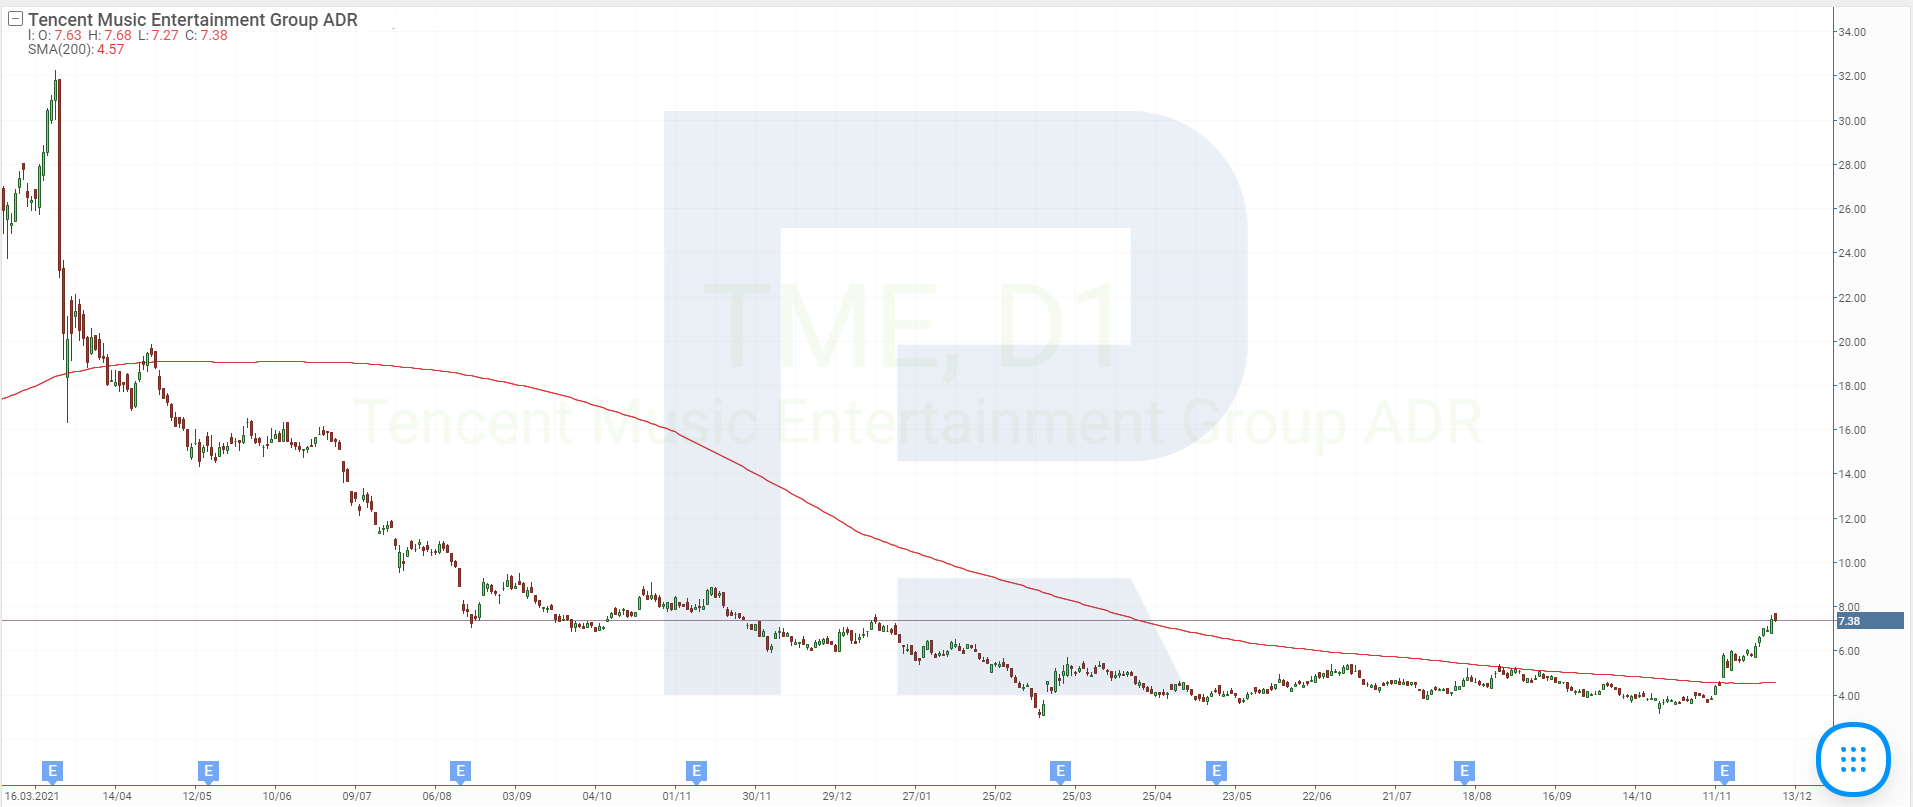 Stock price charts of Tencent Music Entertainment